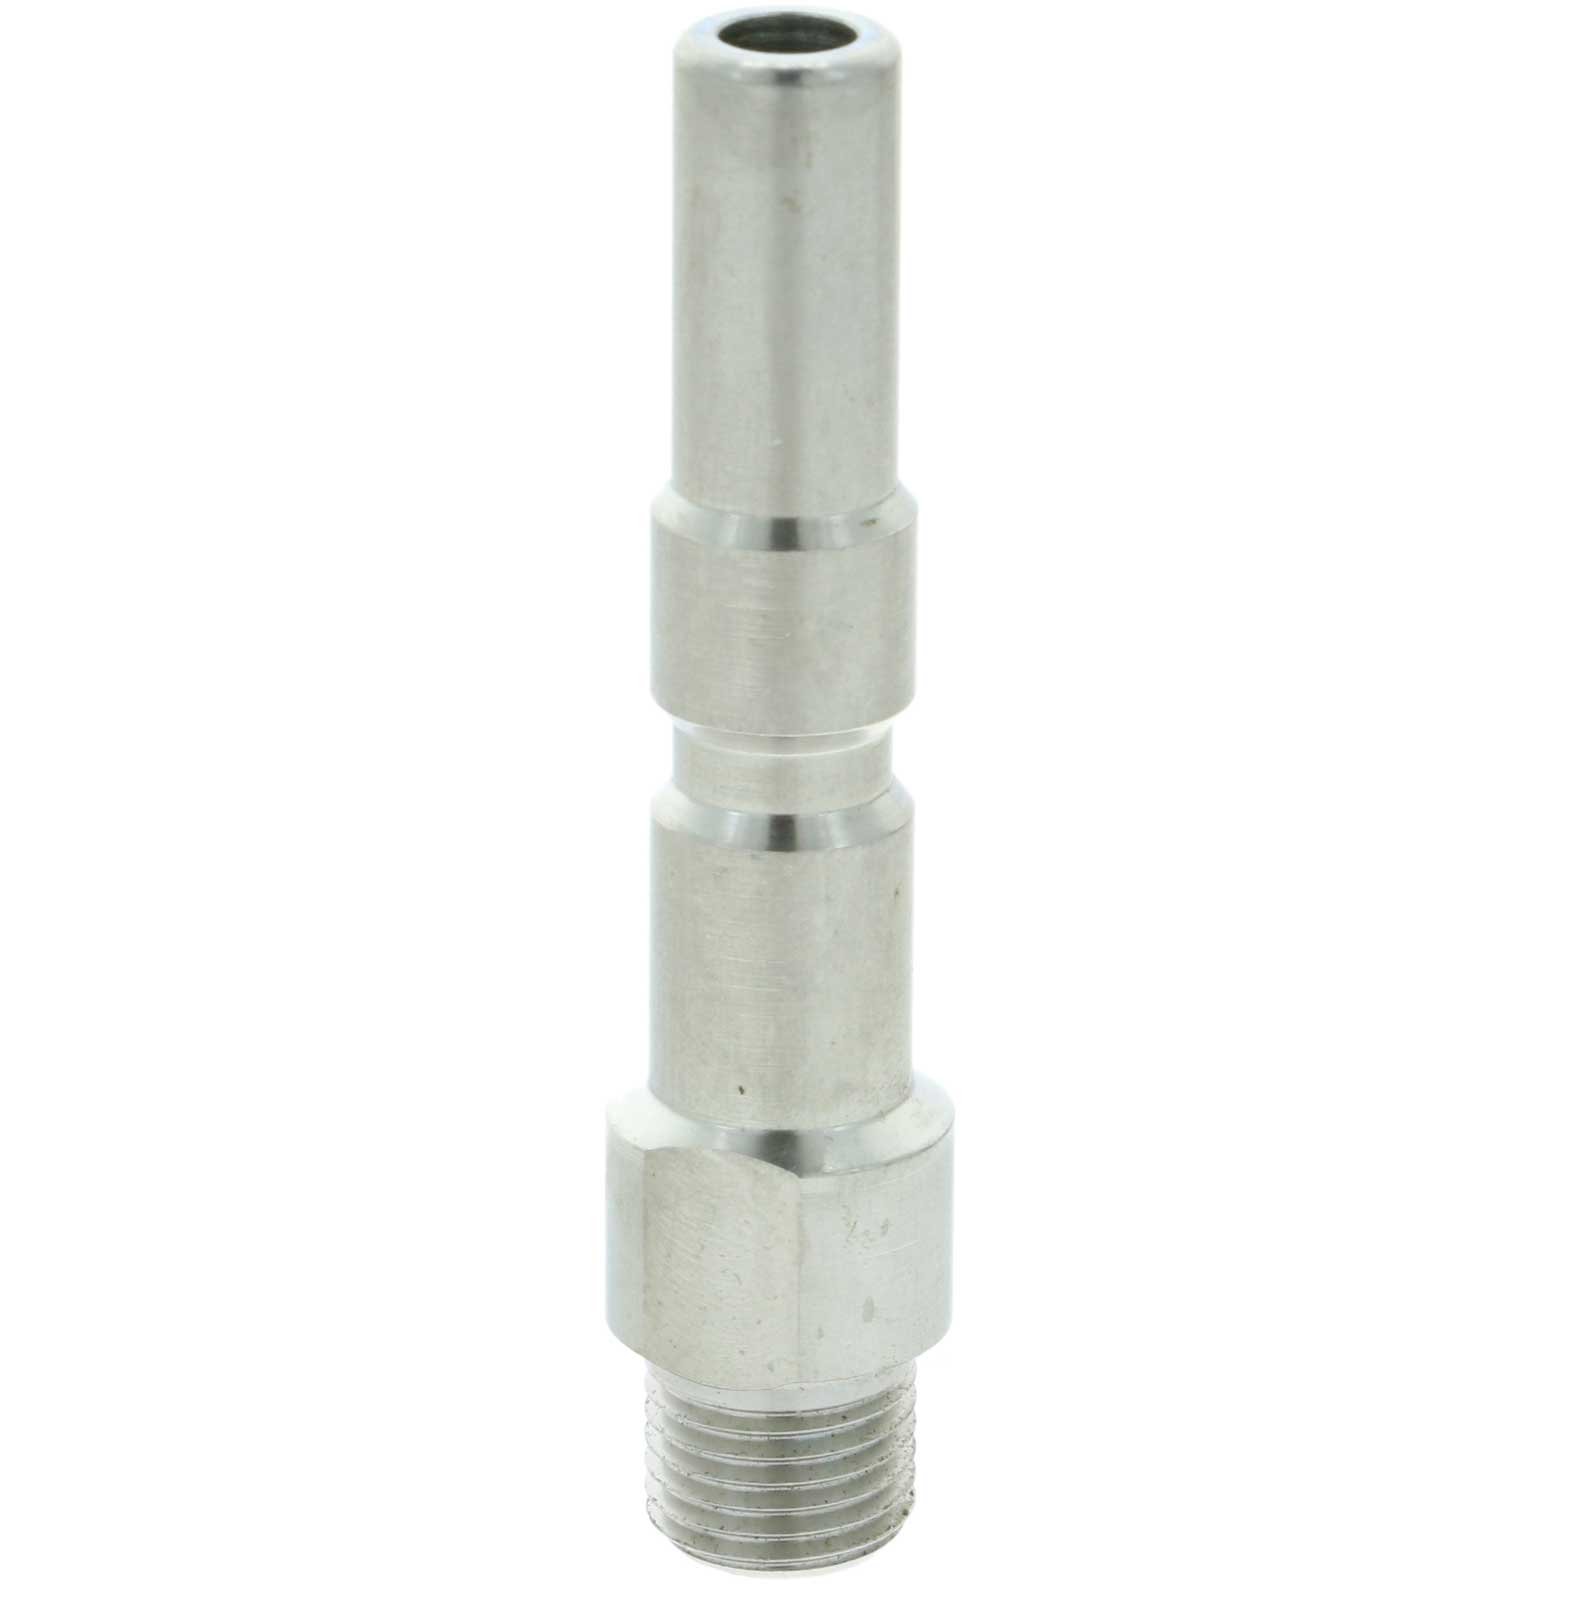 Quick Release connector - type 1